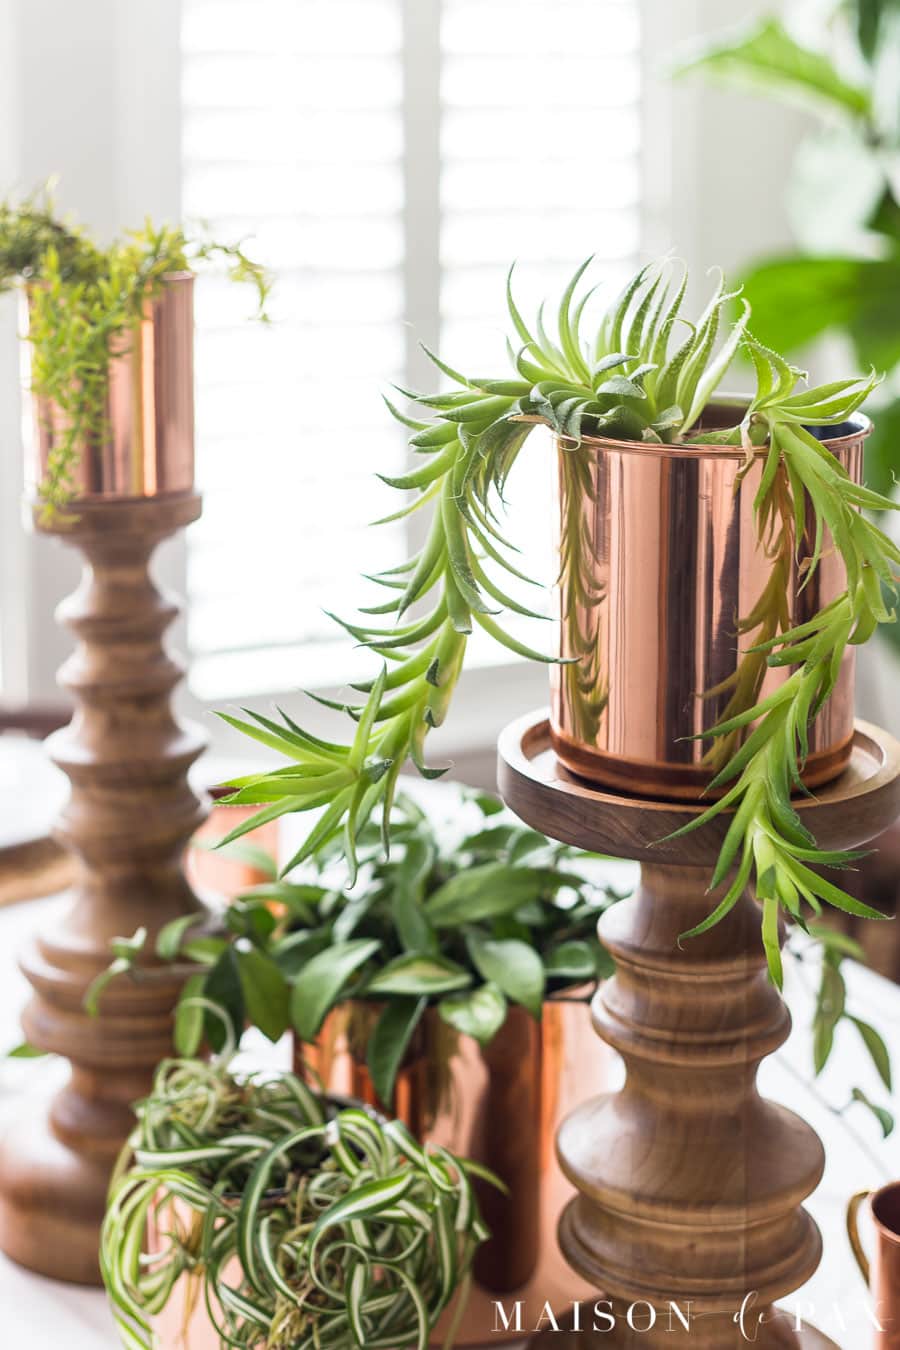 succulents, canisters, and candlesticks for a spring centerpiece | Maison de Pax